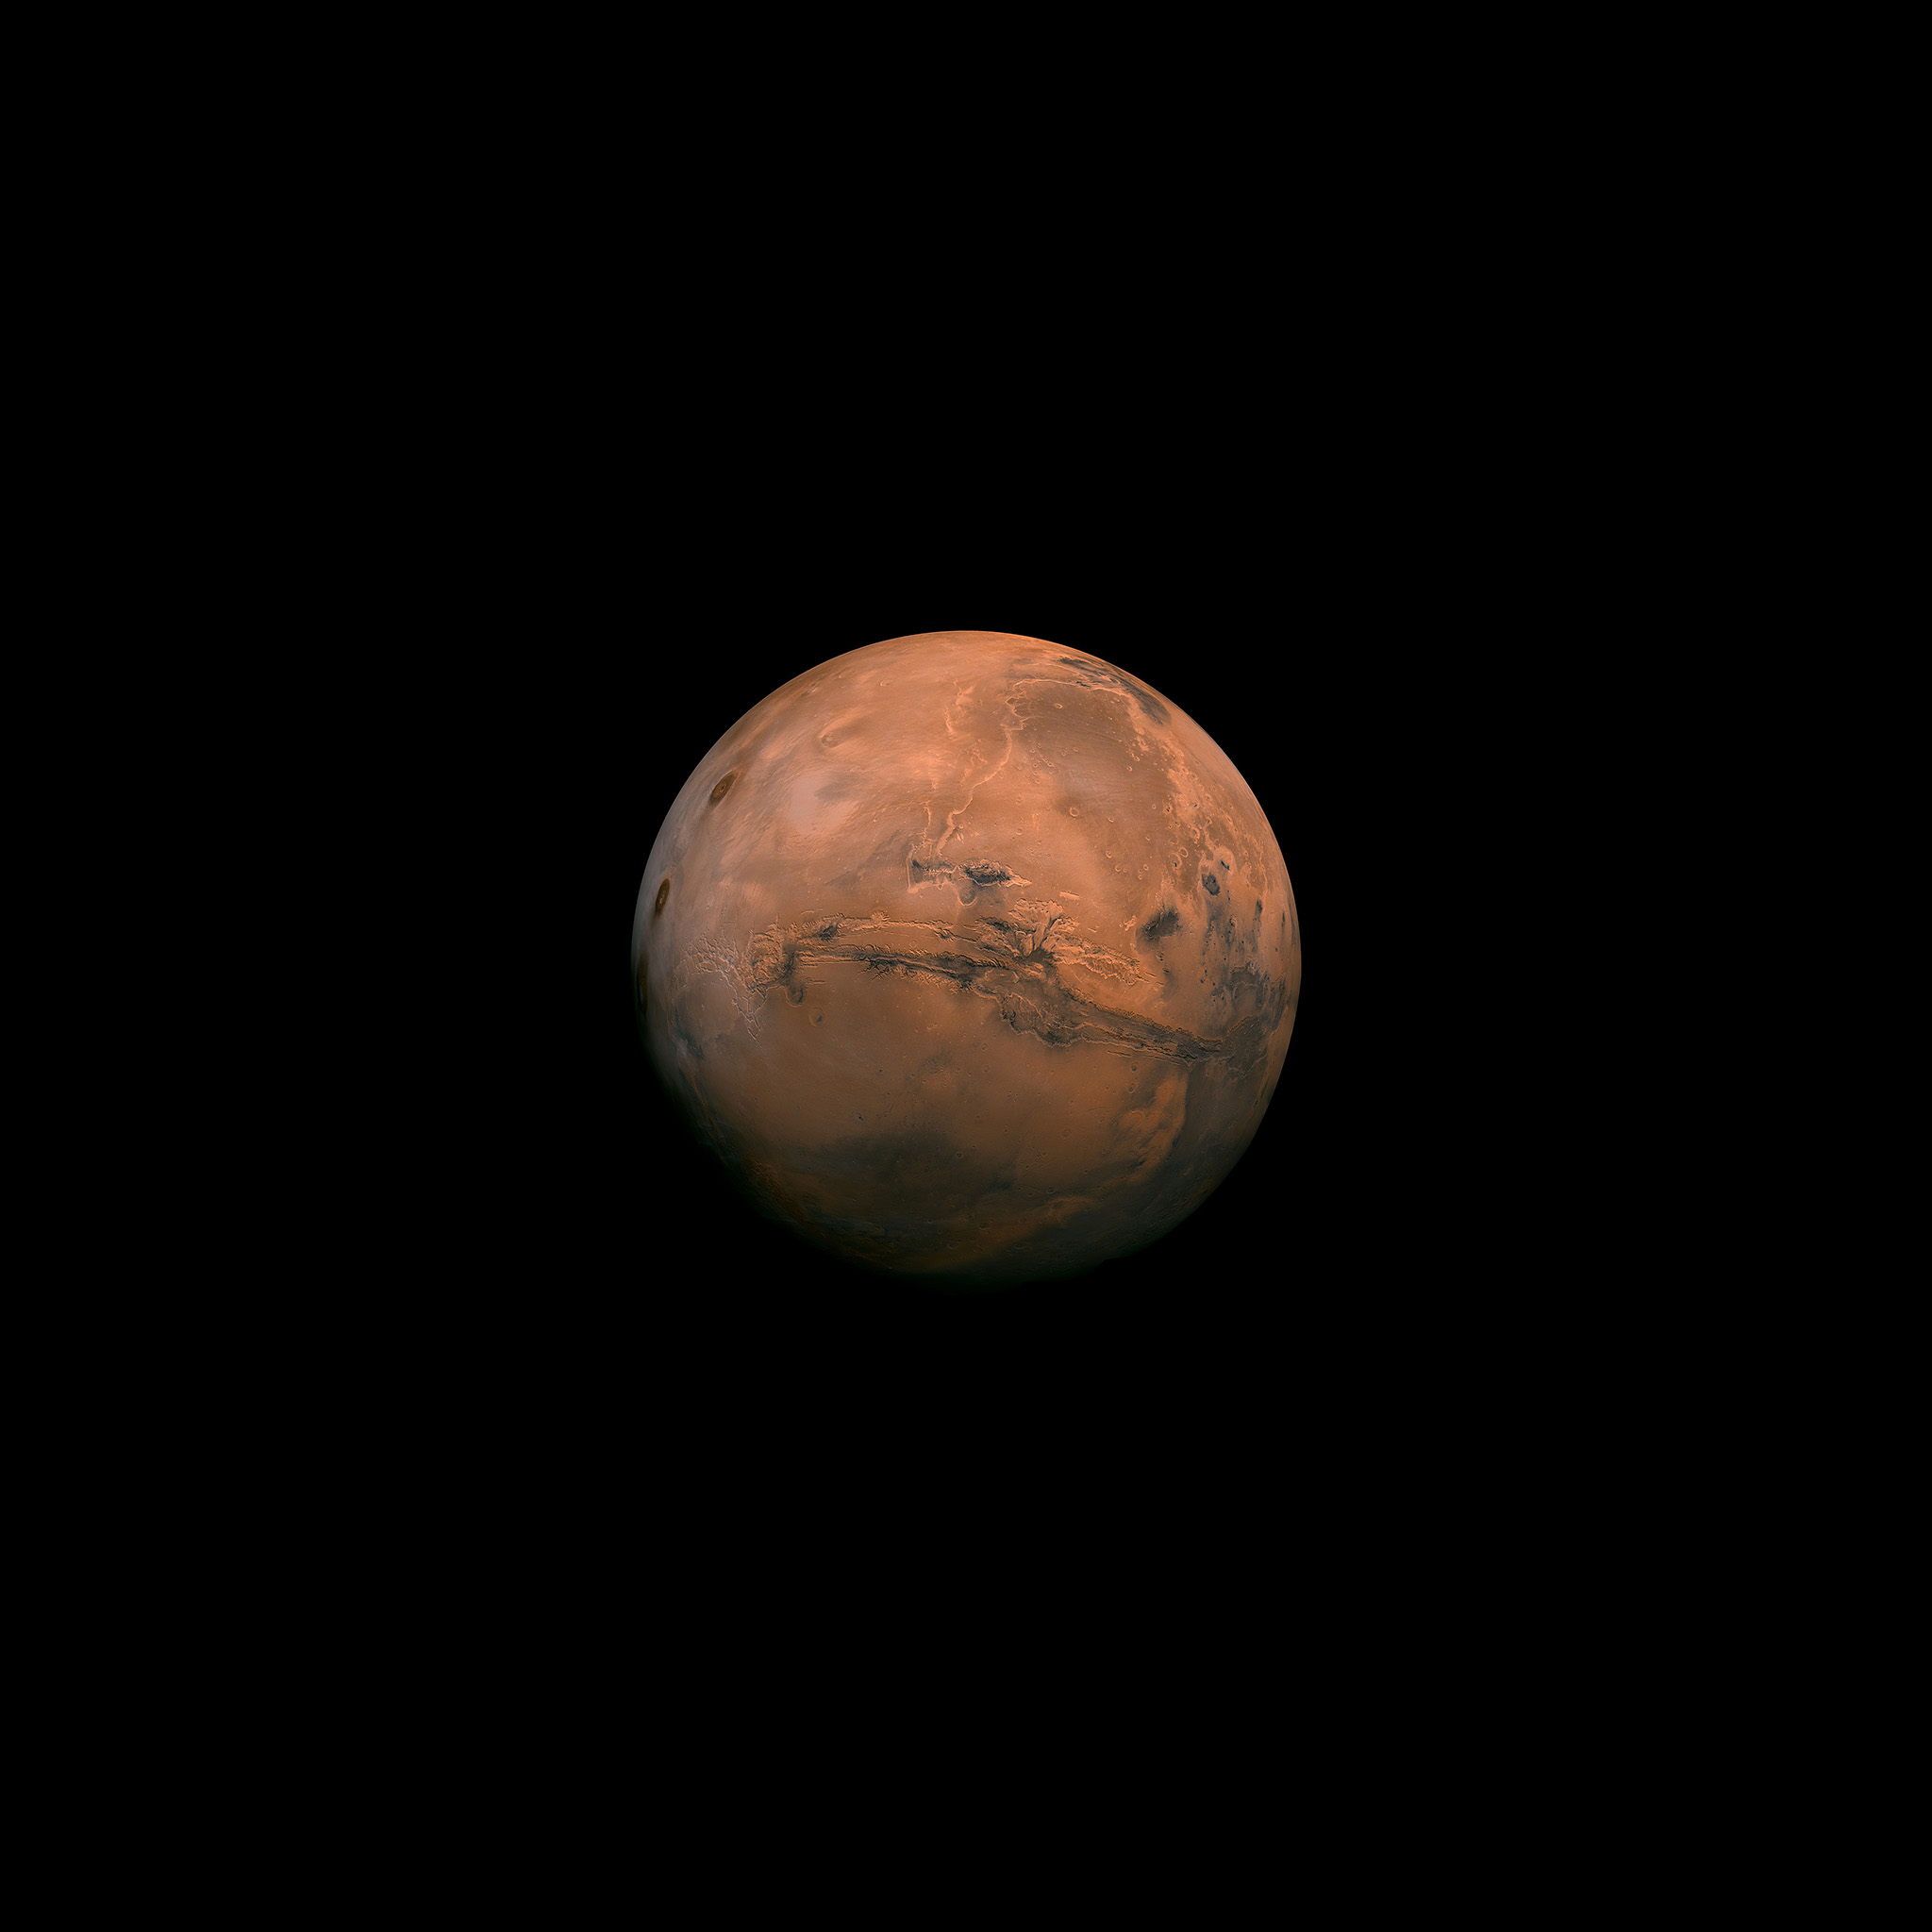 Small Images Of Mars Planet - HD Wallpaper 